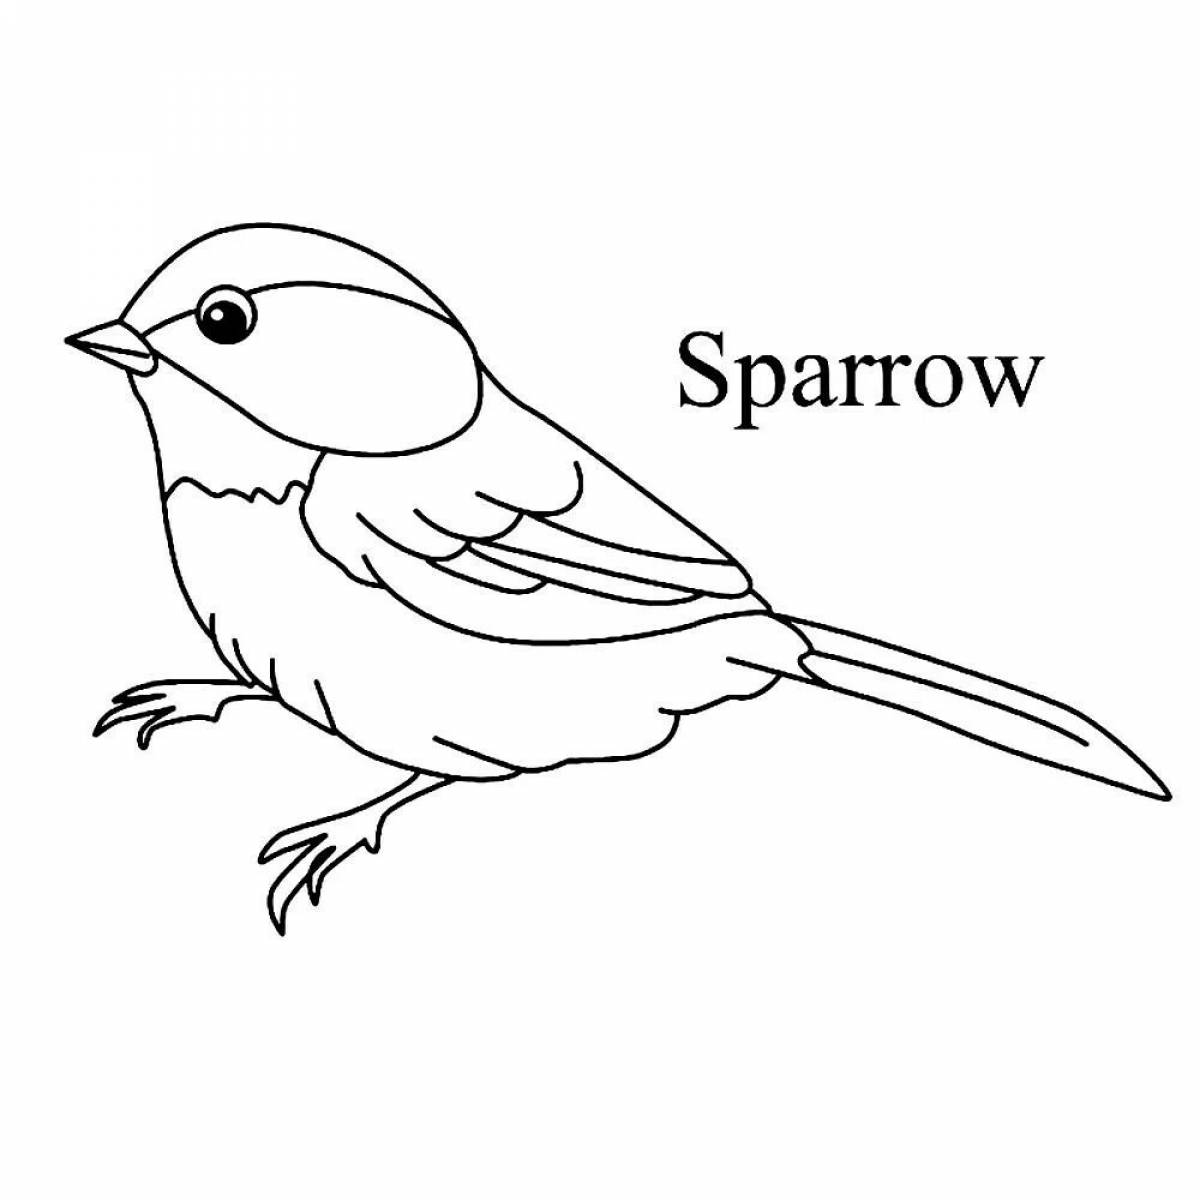 Strange sparrow coloring pages for kids